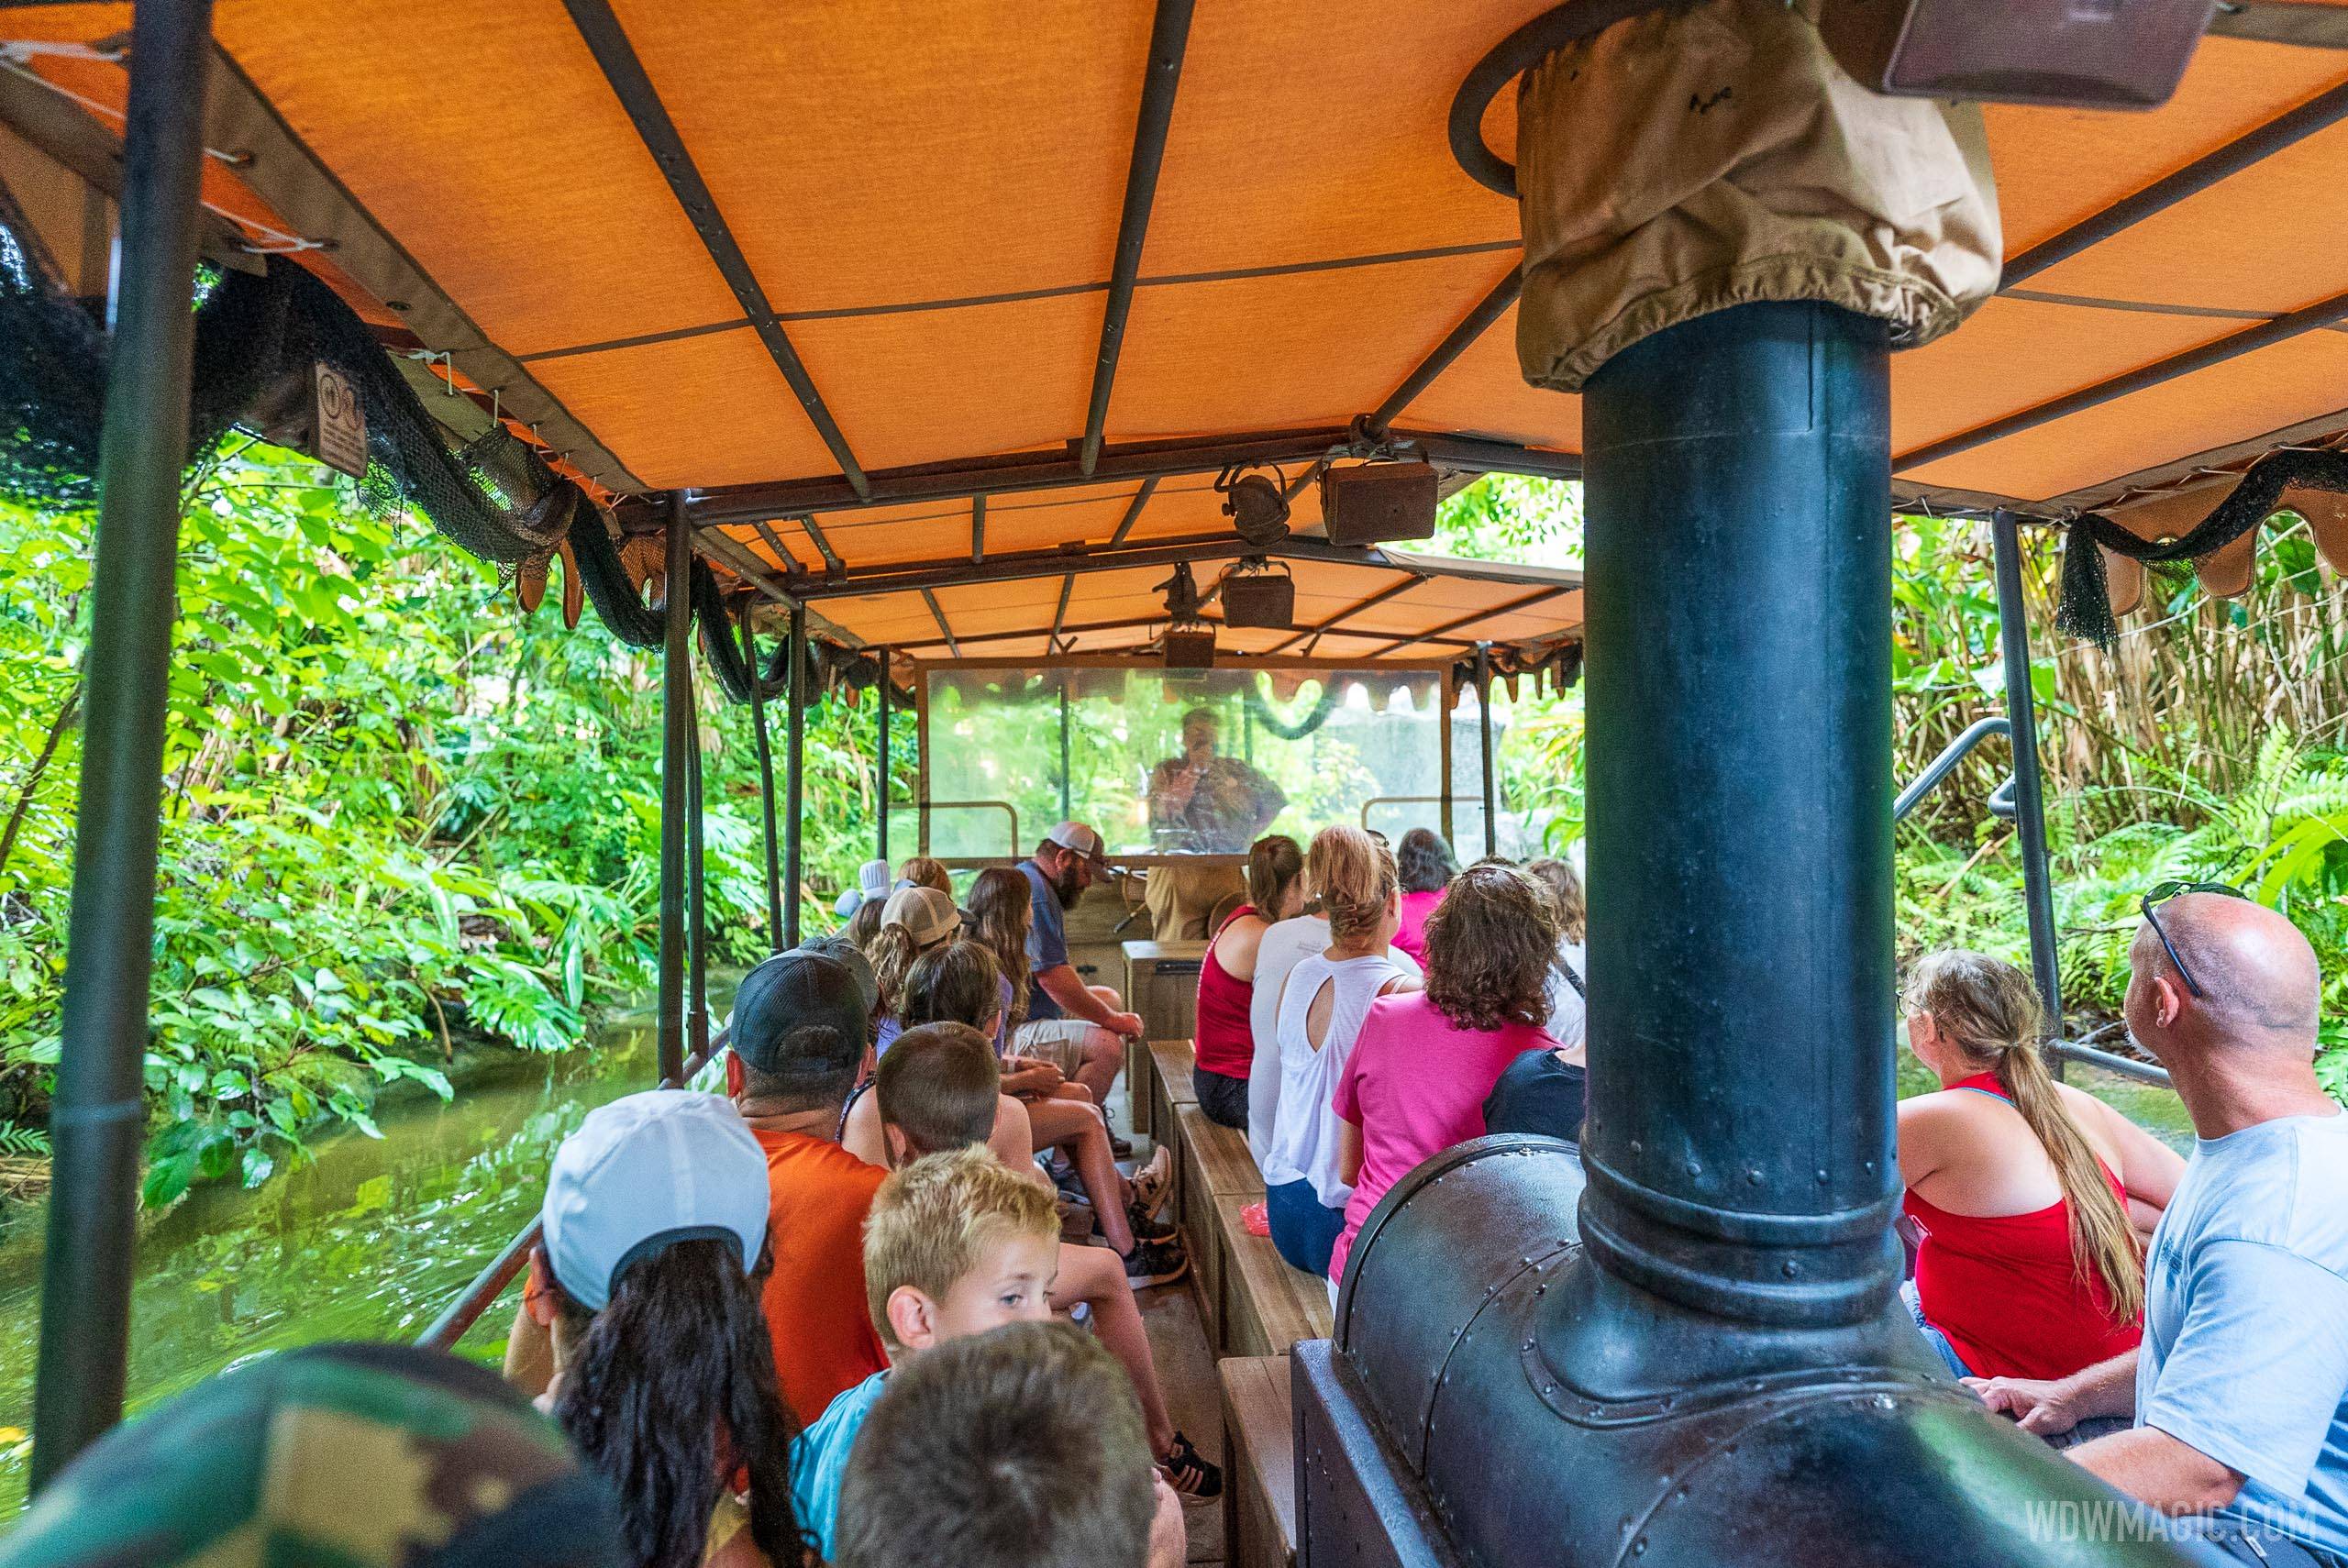 Even the middle bench is now in use at Jungle Cruise